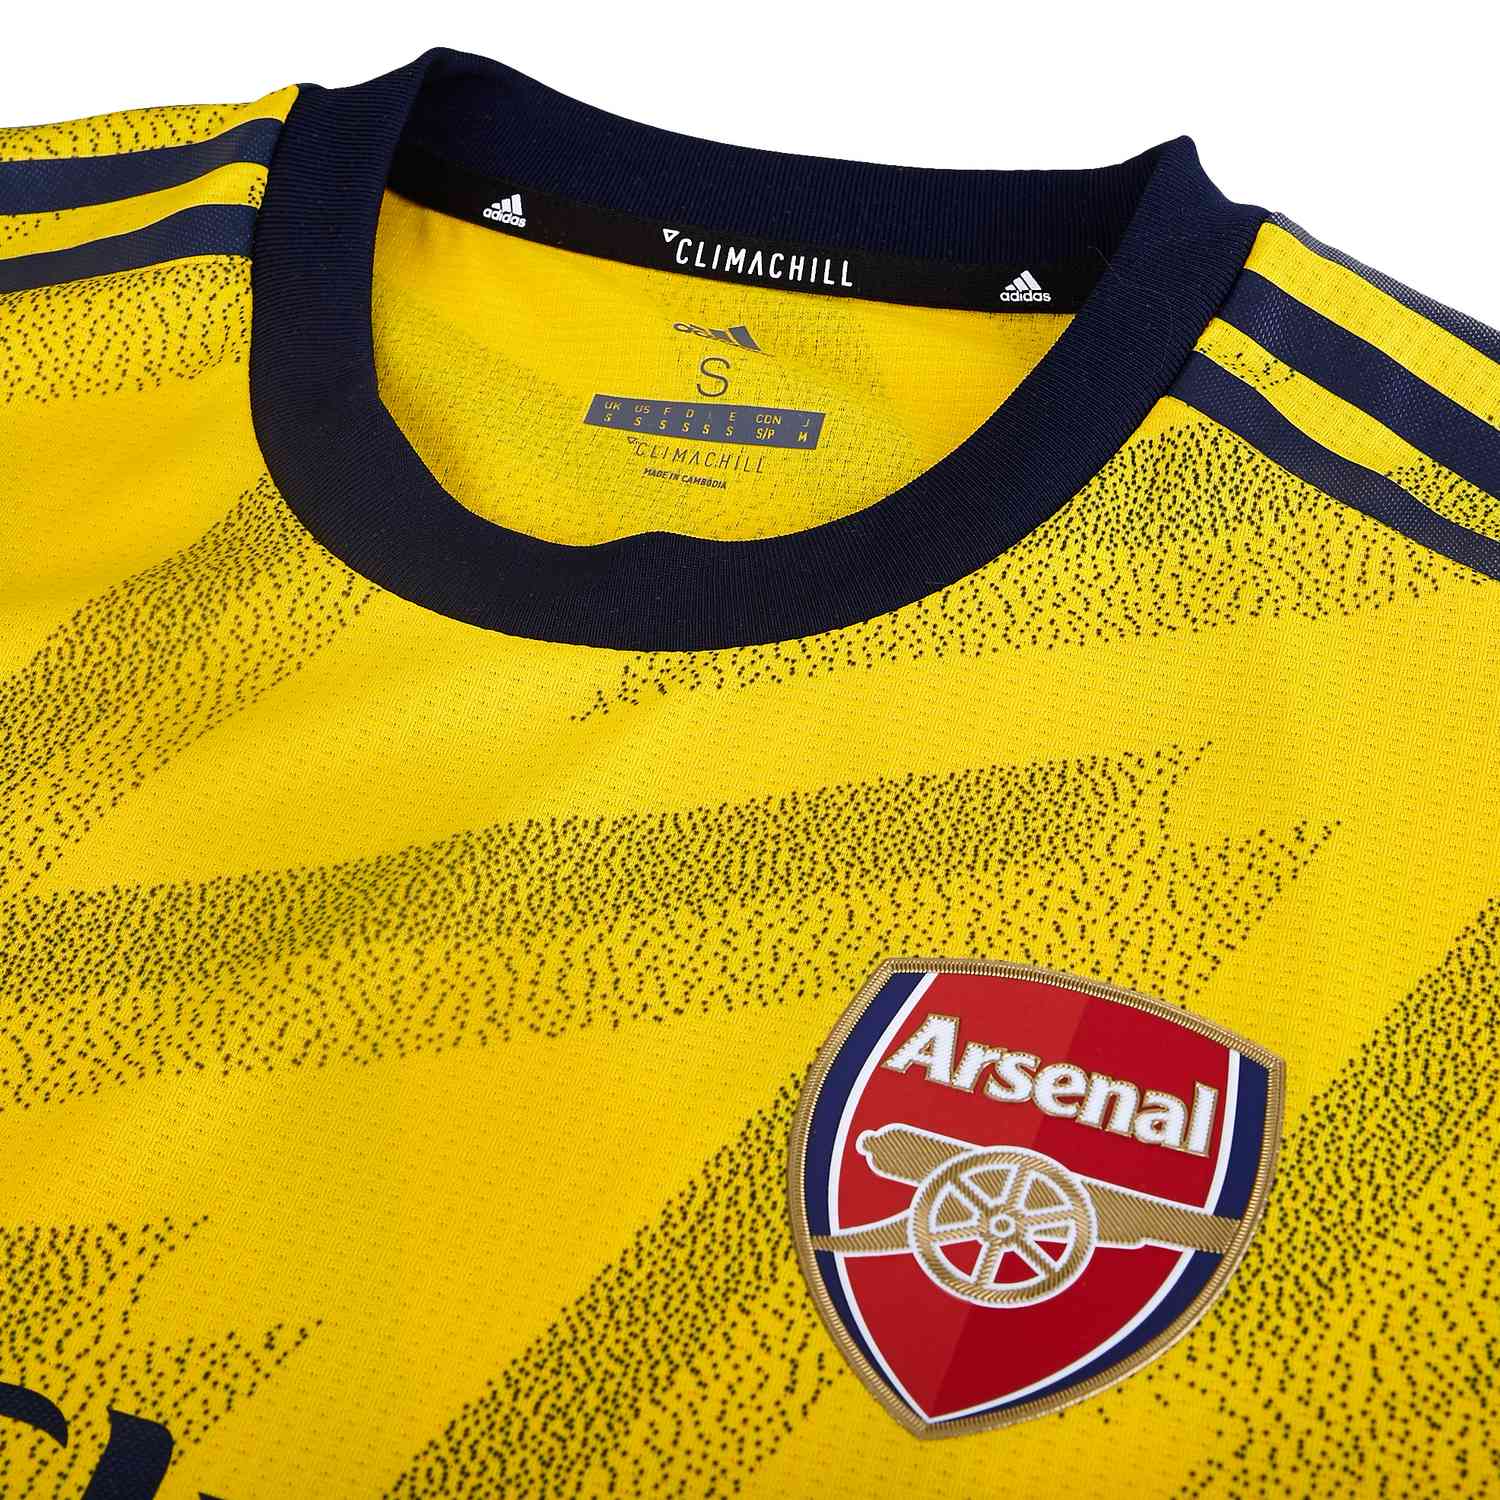 Brand New With Tags Size Large Arsenal Away Football Shirt 19/20 